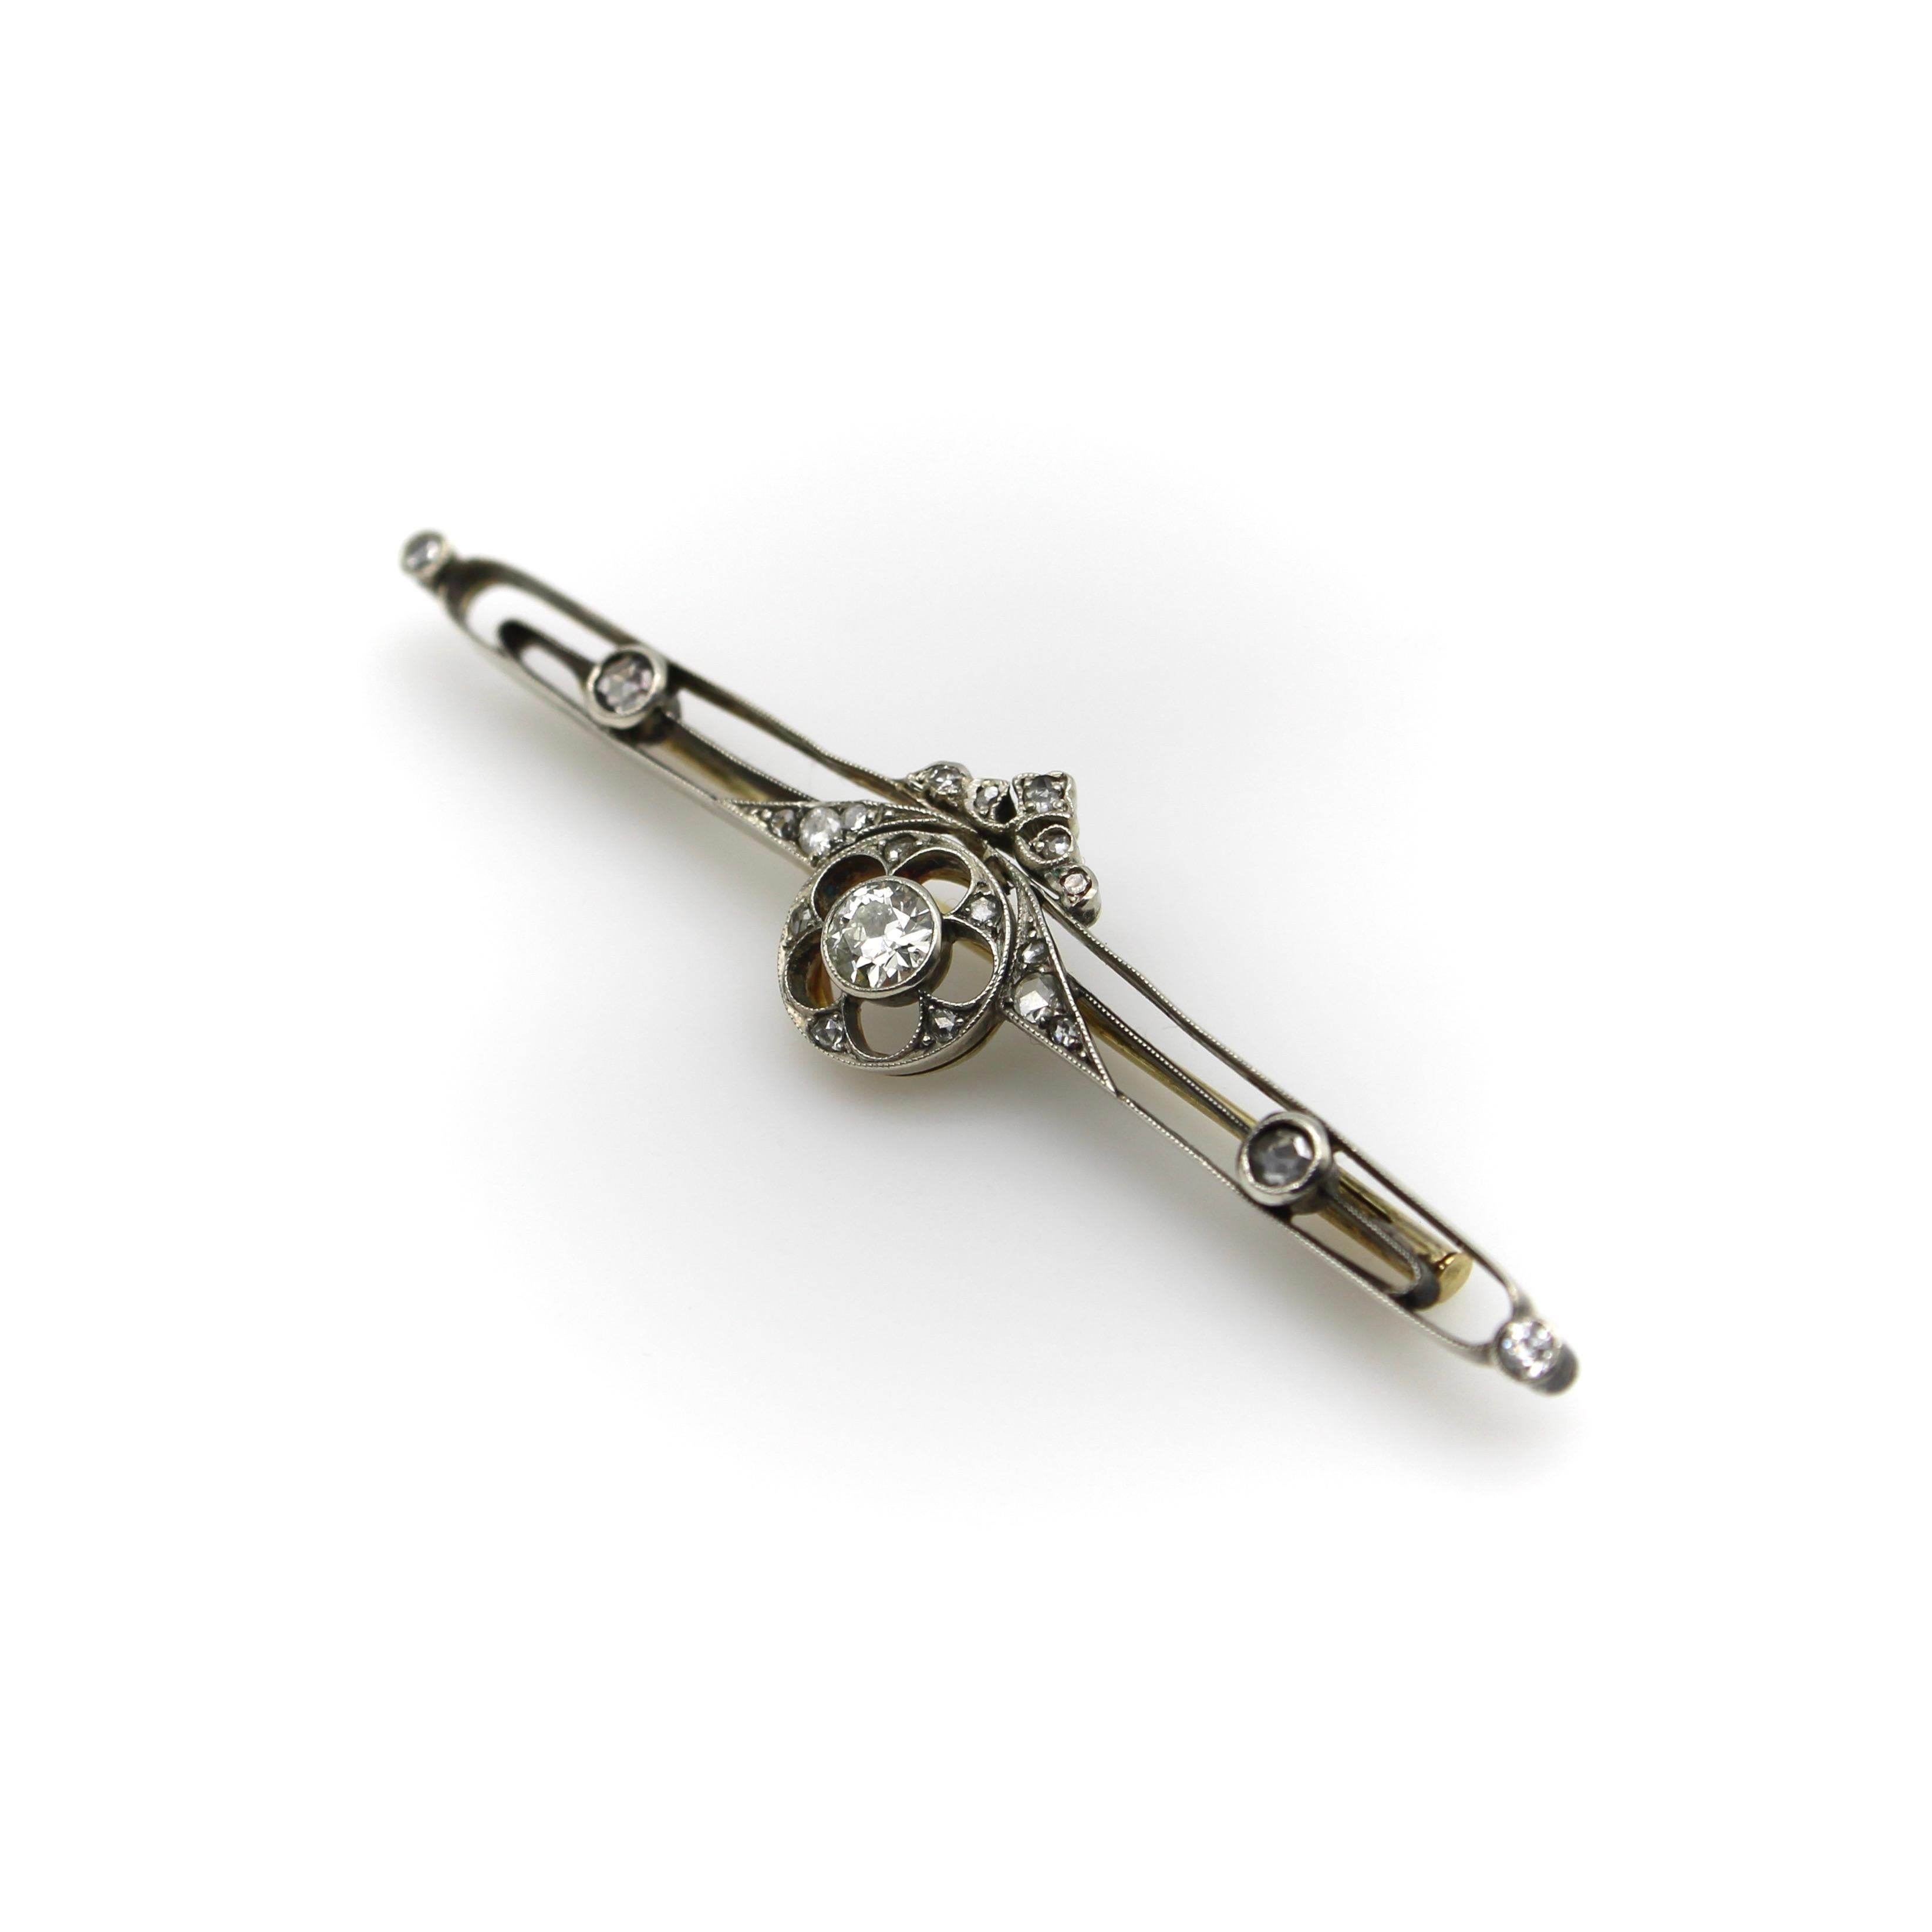 This diamond encrusted bar pin dates to 1900’s pre-revolutionary Russia. The center Old European Cut diamond is bezel set with beautiful milgrain work around it. Set in a larger circle element, the diamond is surrounded by cut outs in the shape of a